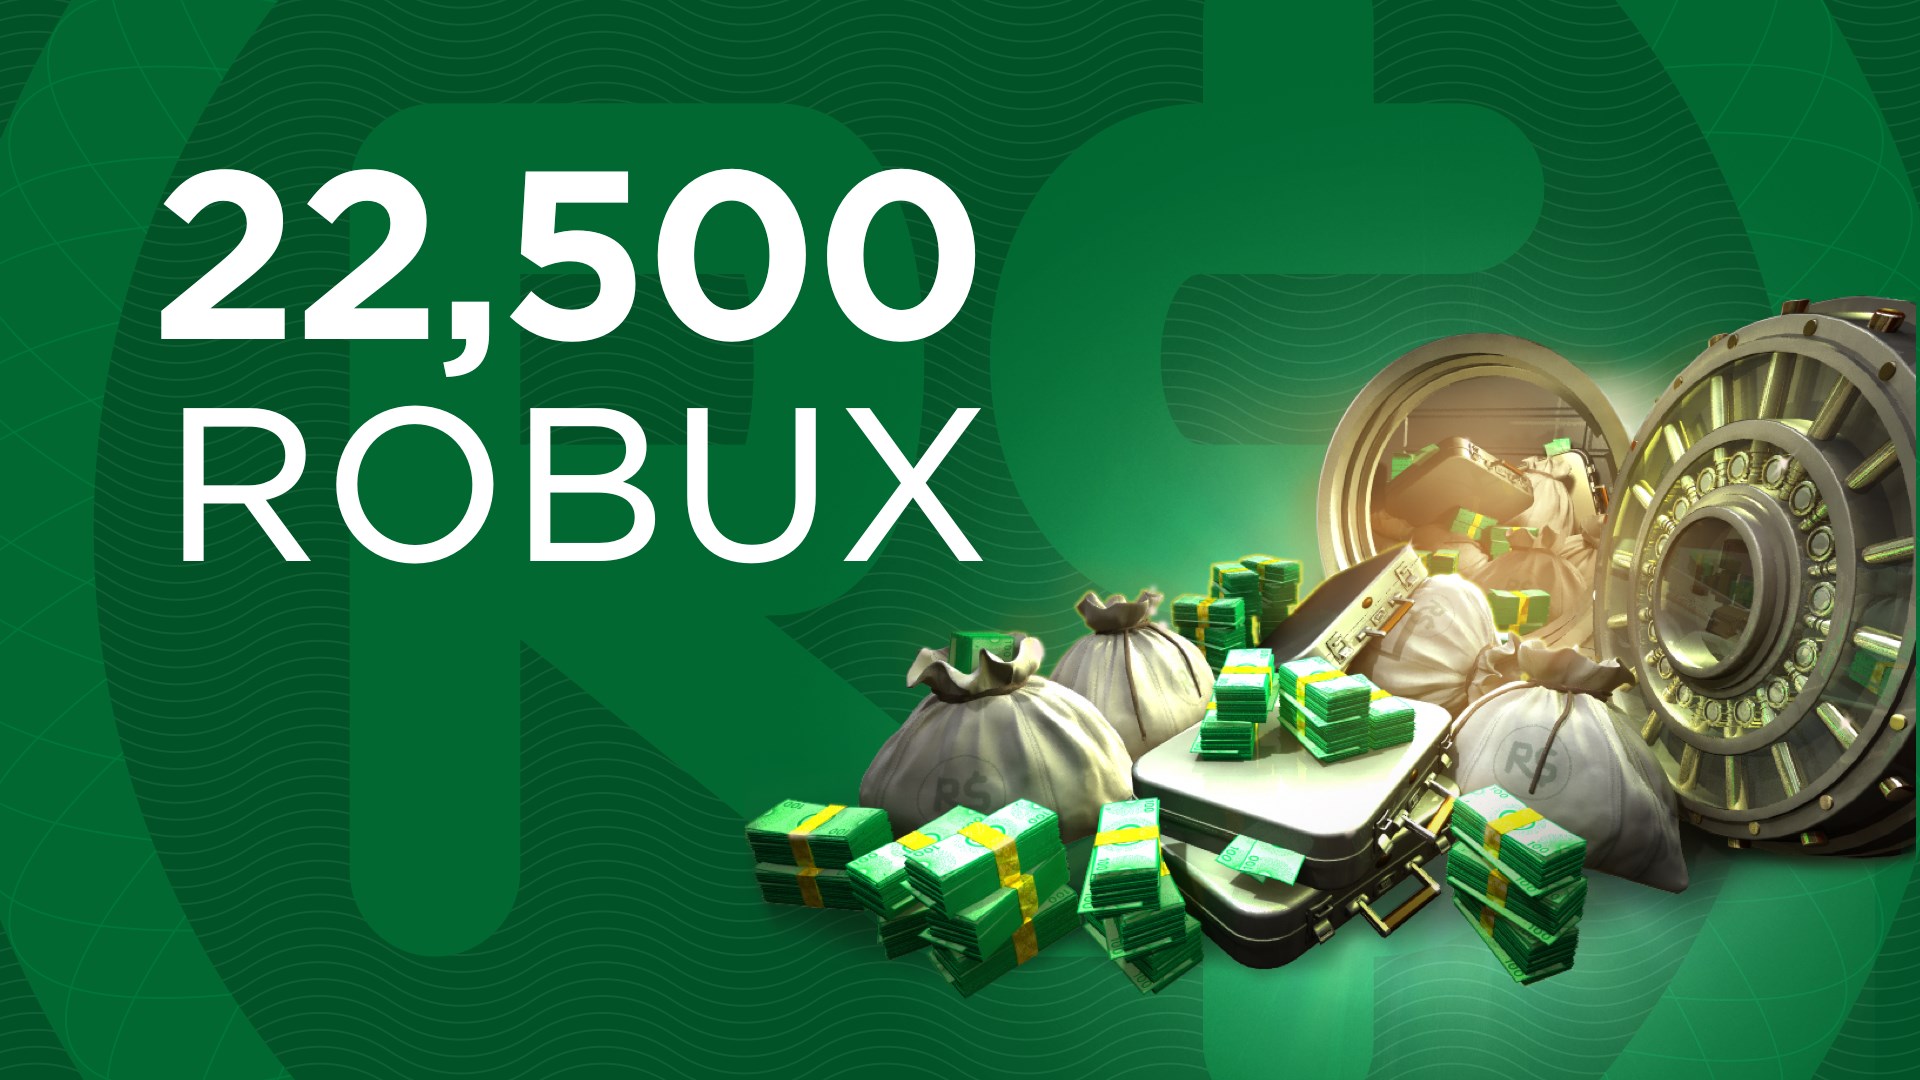 How Much Is 200 Robux In Dollars